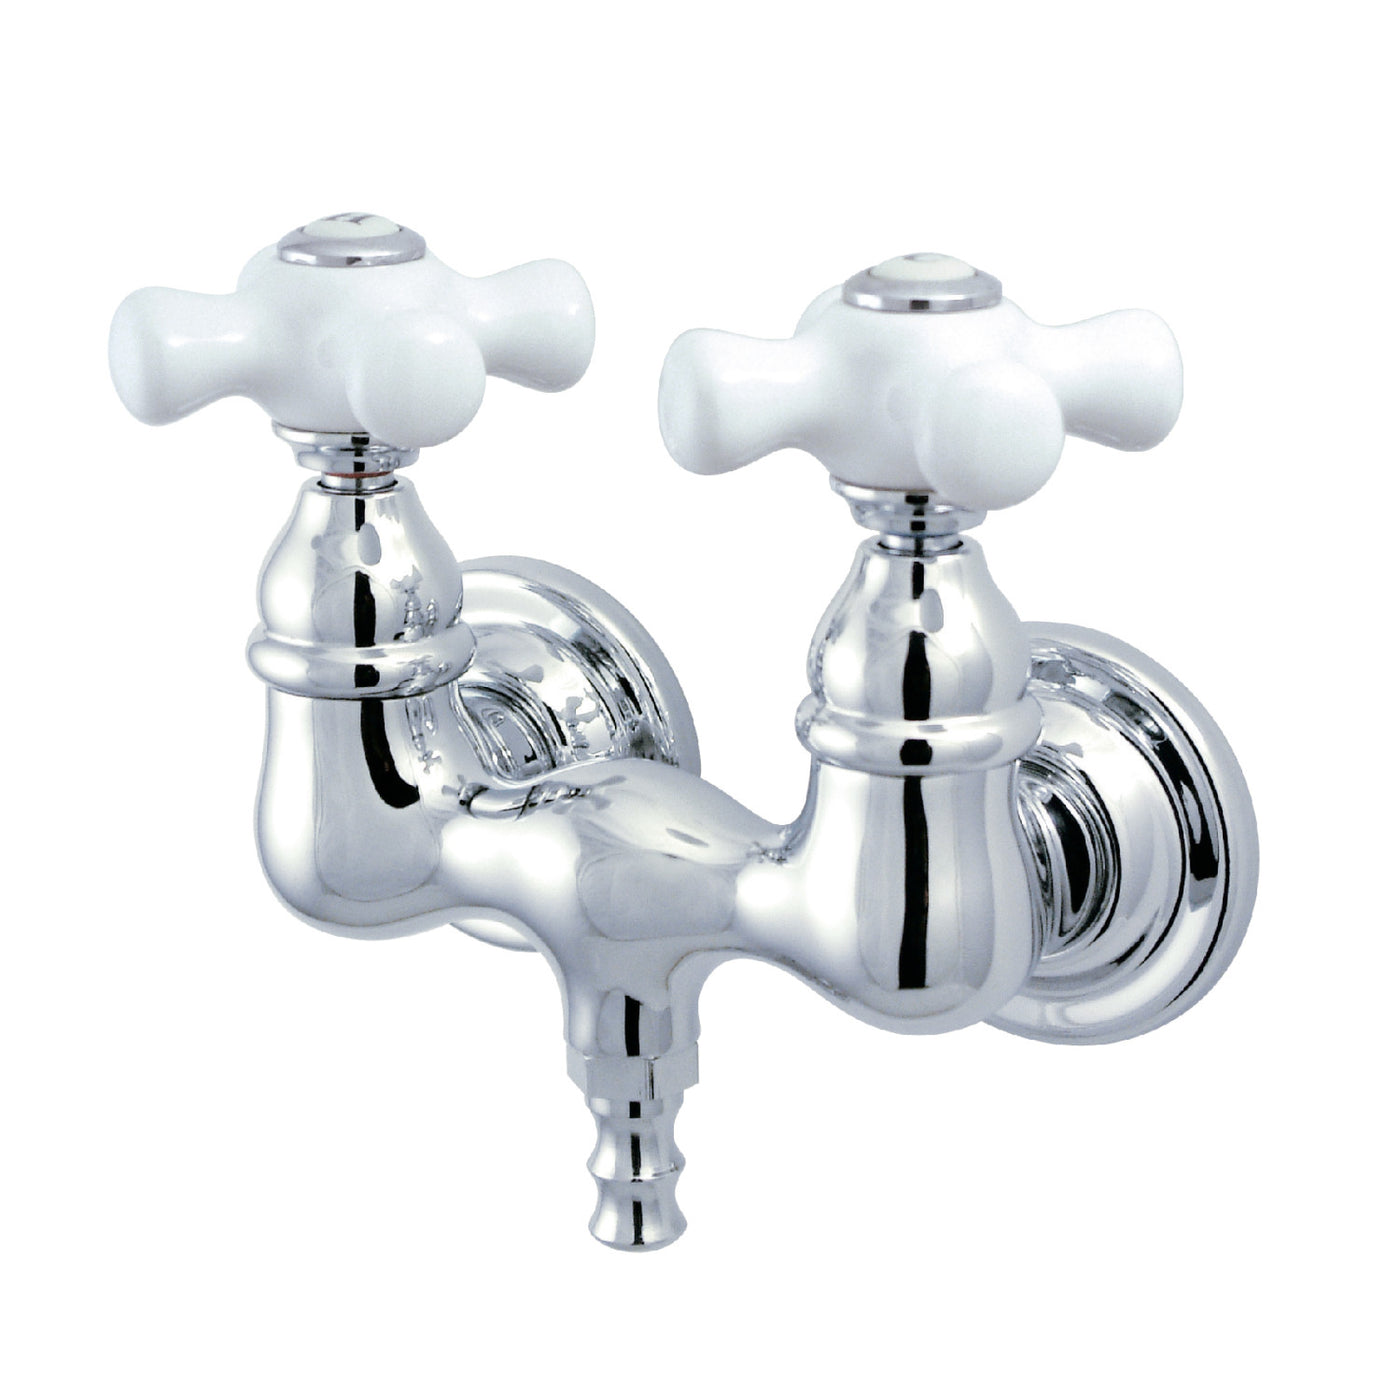 Elements of Design DT0321PX 3-3/8-Inch Wall Mount Tub Faucet, Polished Chrome